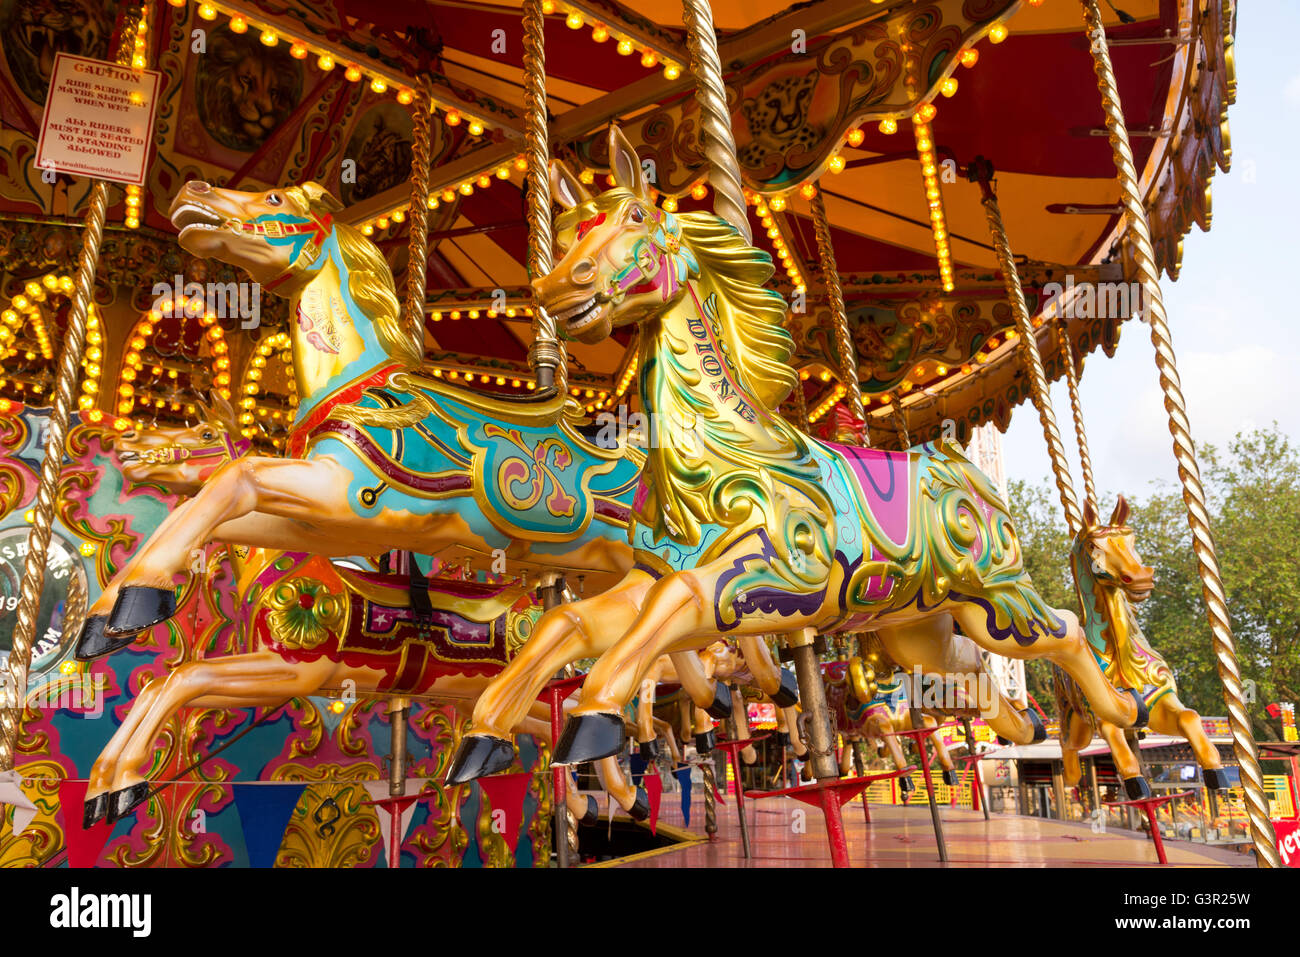 Horses of an old fashioned carousel ride in fairground, England, UK Stock Photo